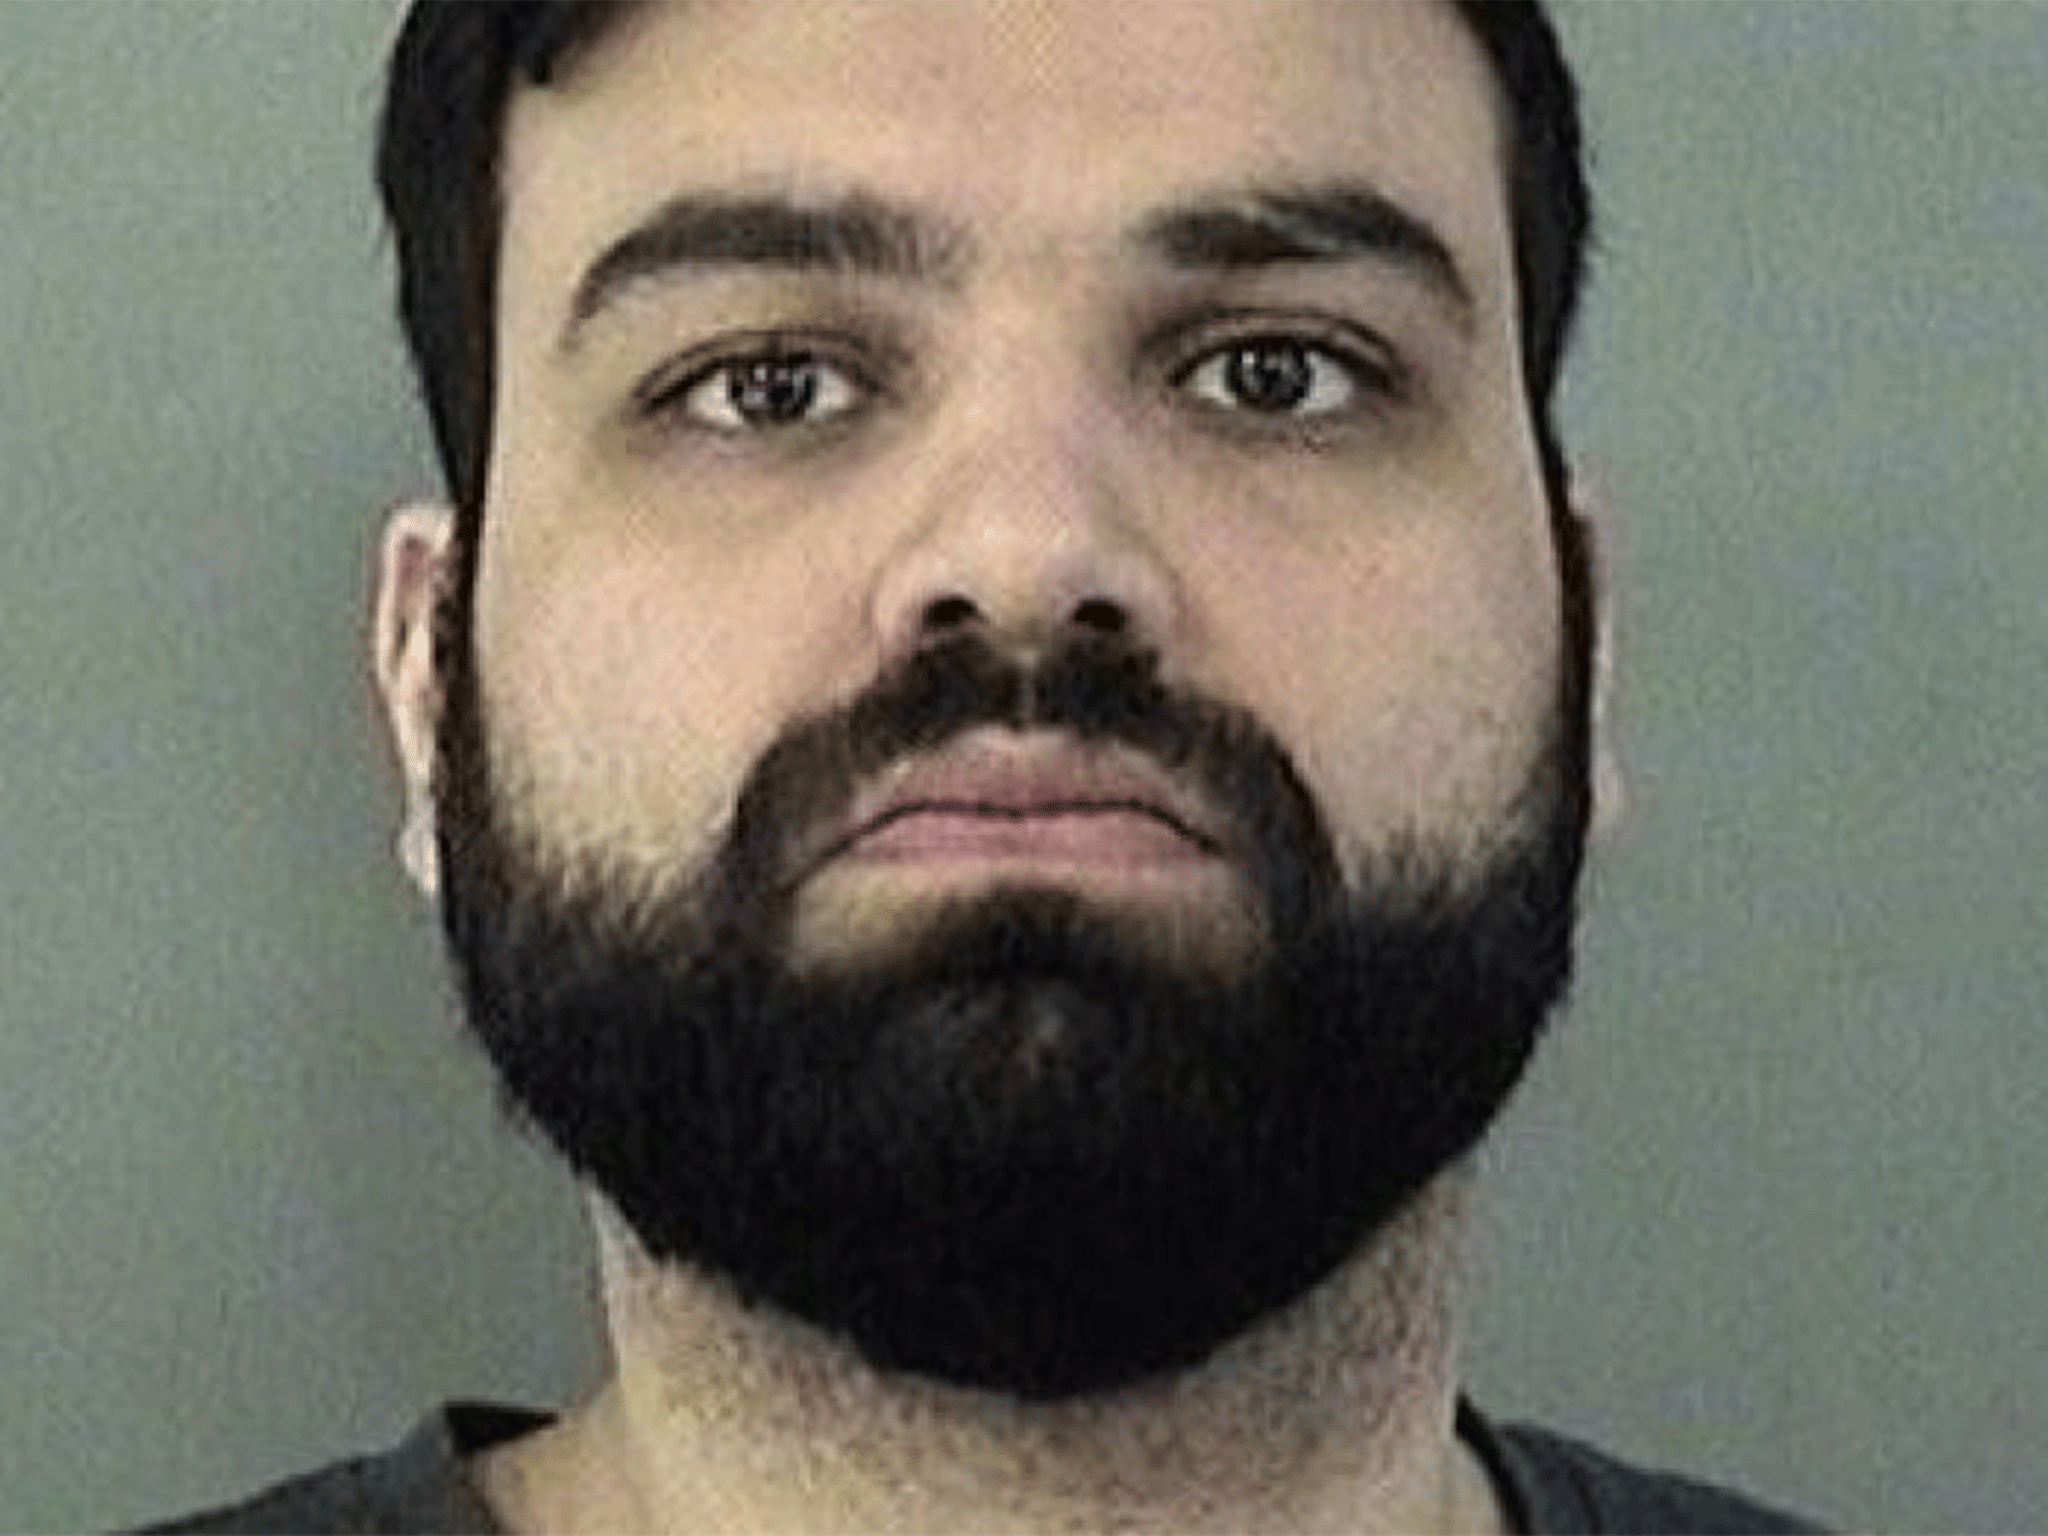 Sikander Imran is accused by his former girlfriend of killing their unborn baby